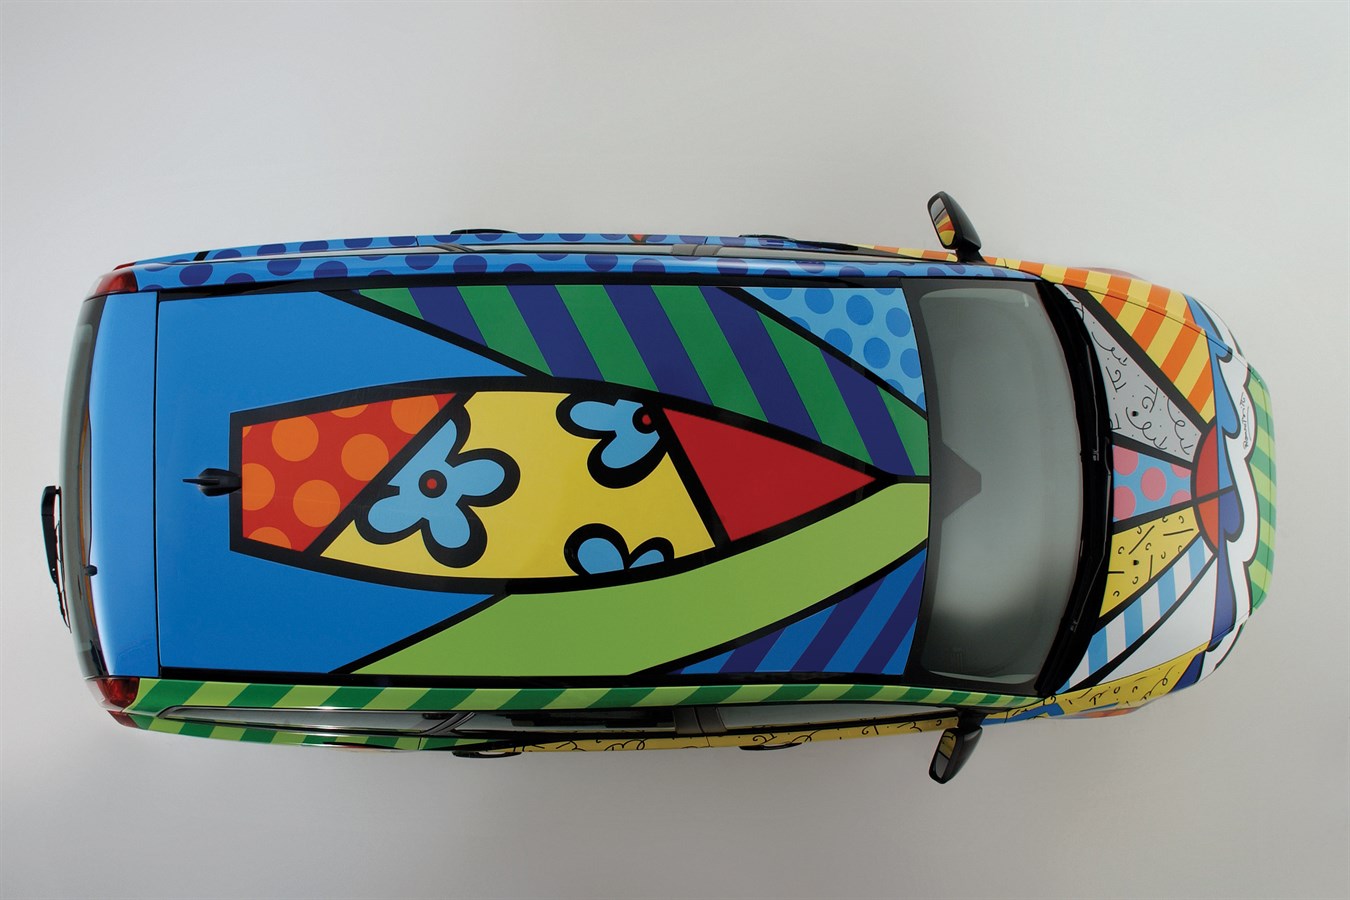 2005 Volvo V50 - Painted by Romero Britto